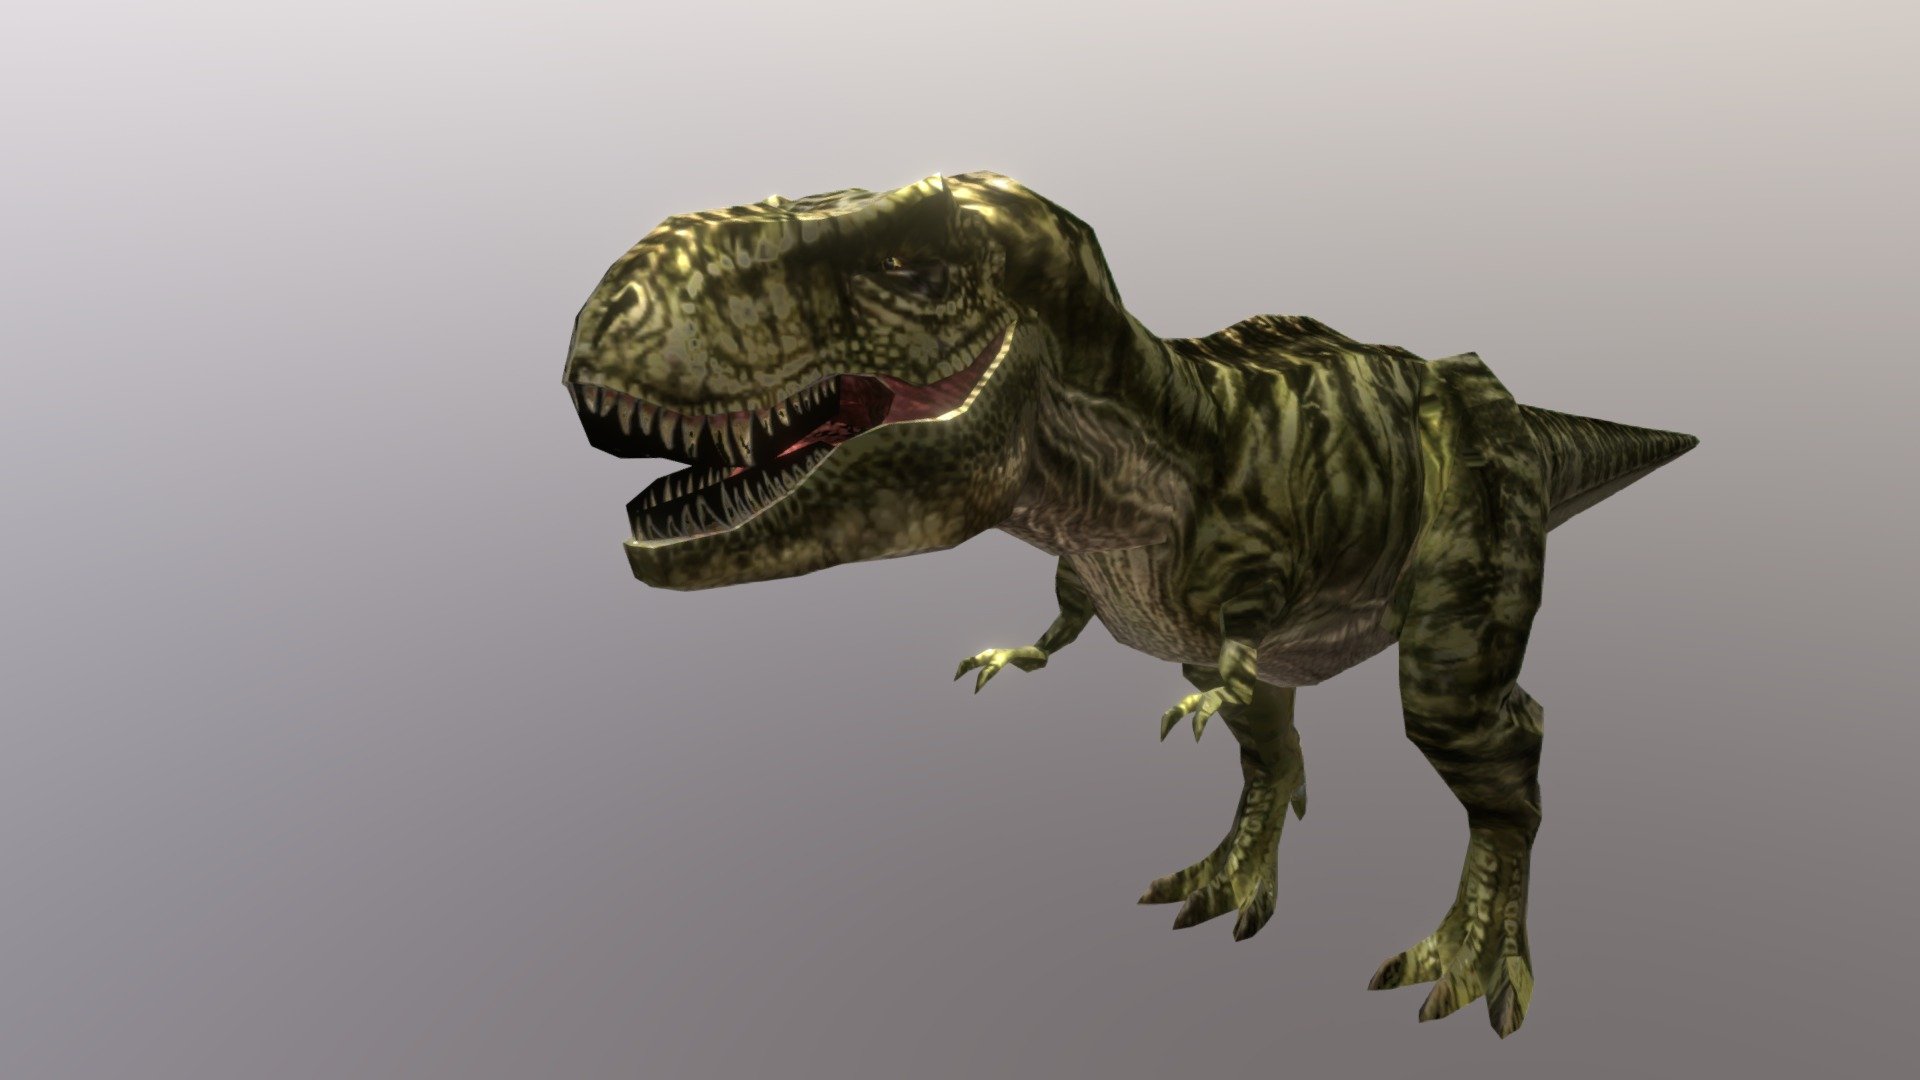 Dino T-Rex 3D Game for Android - Download